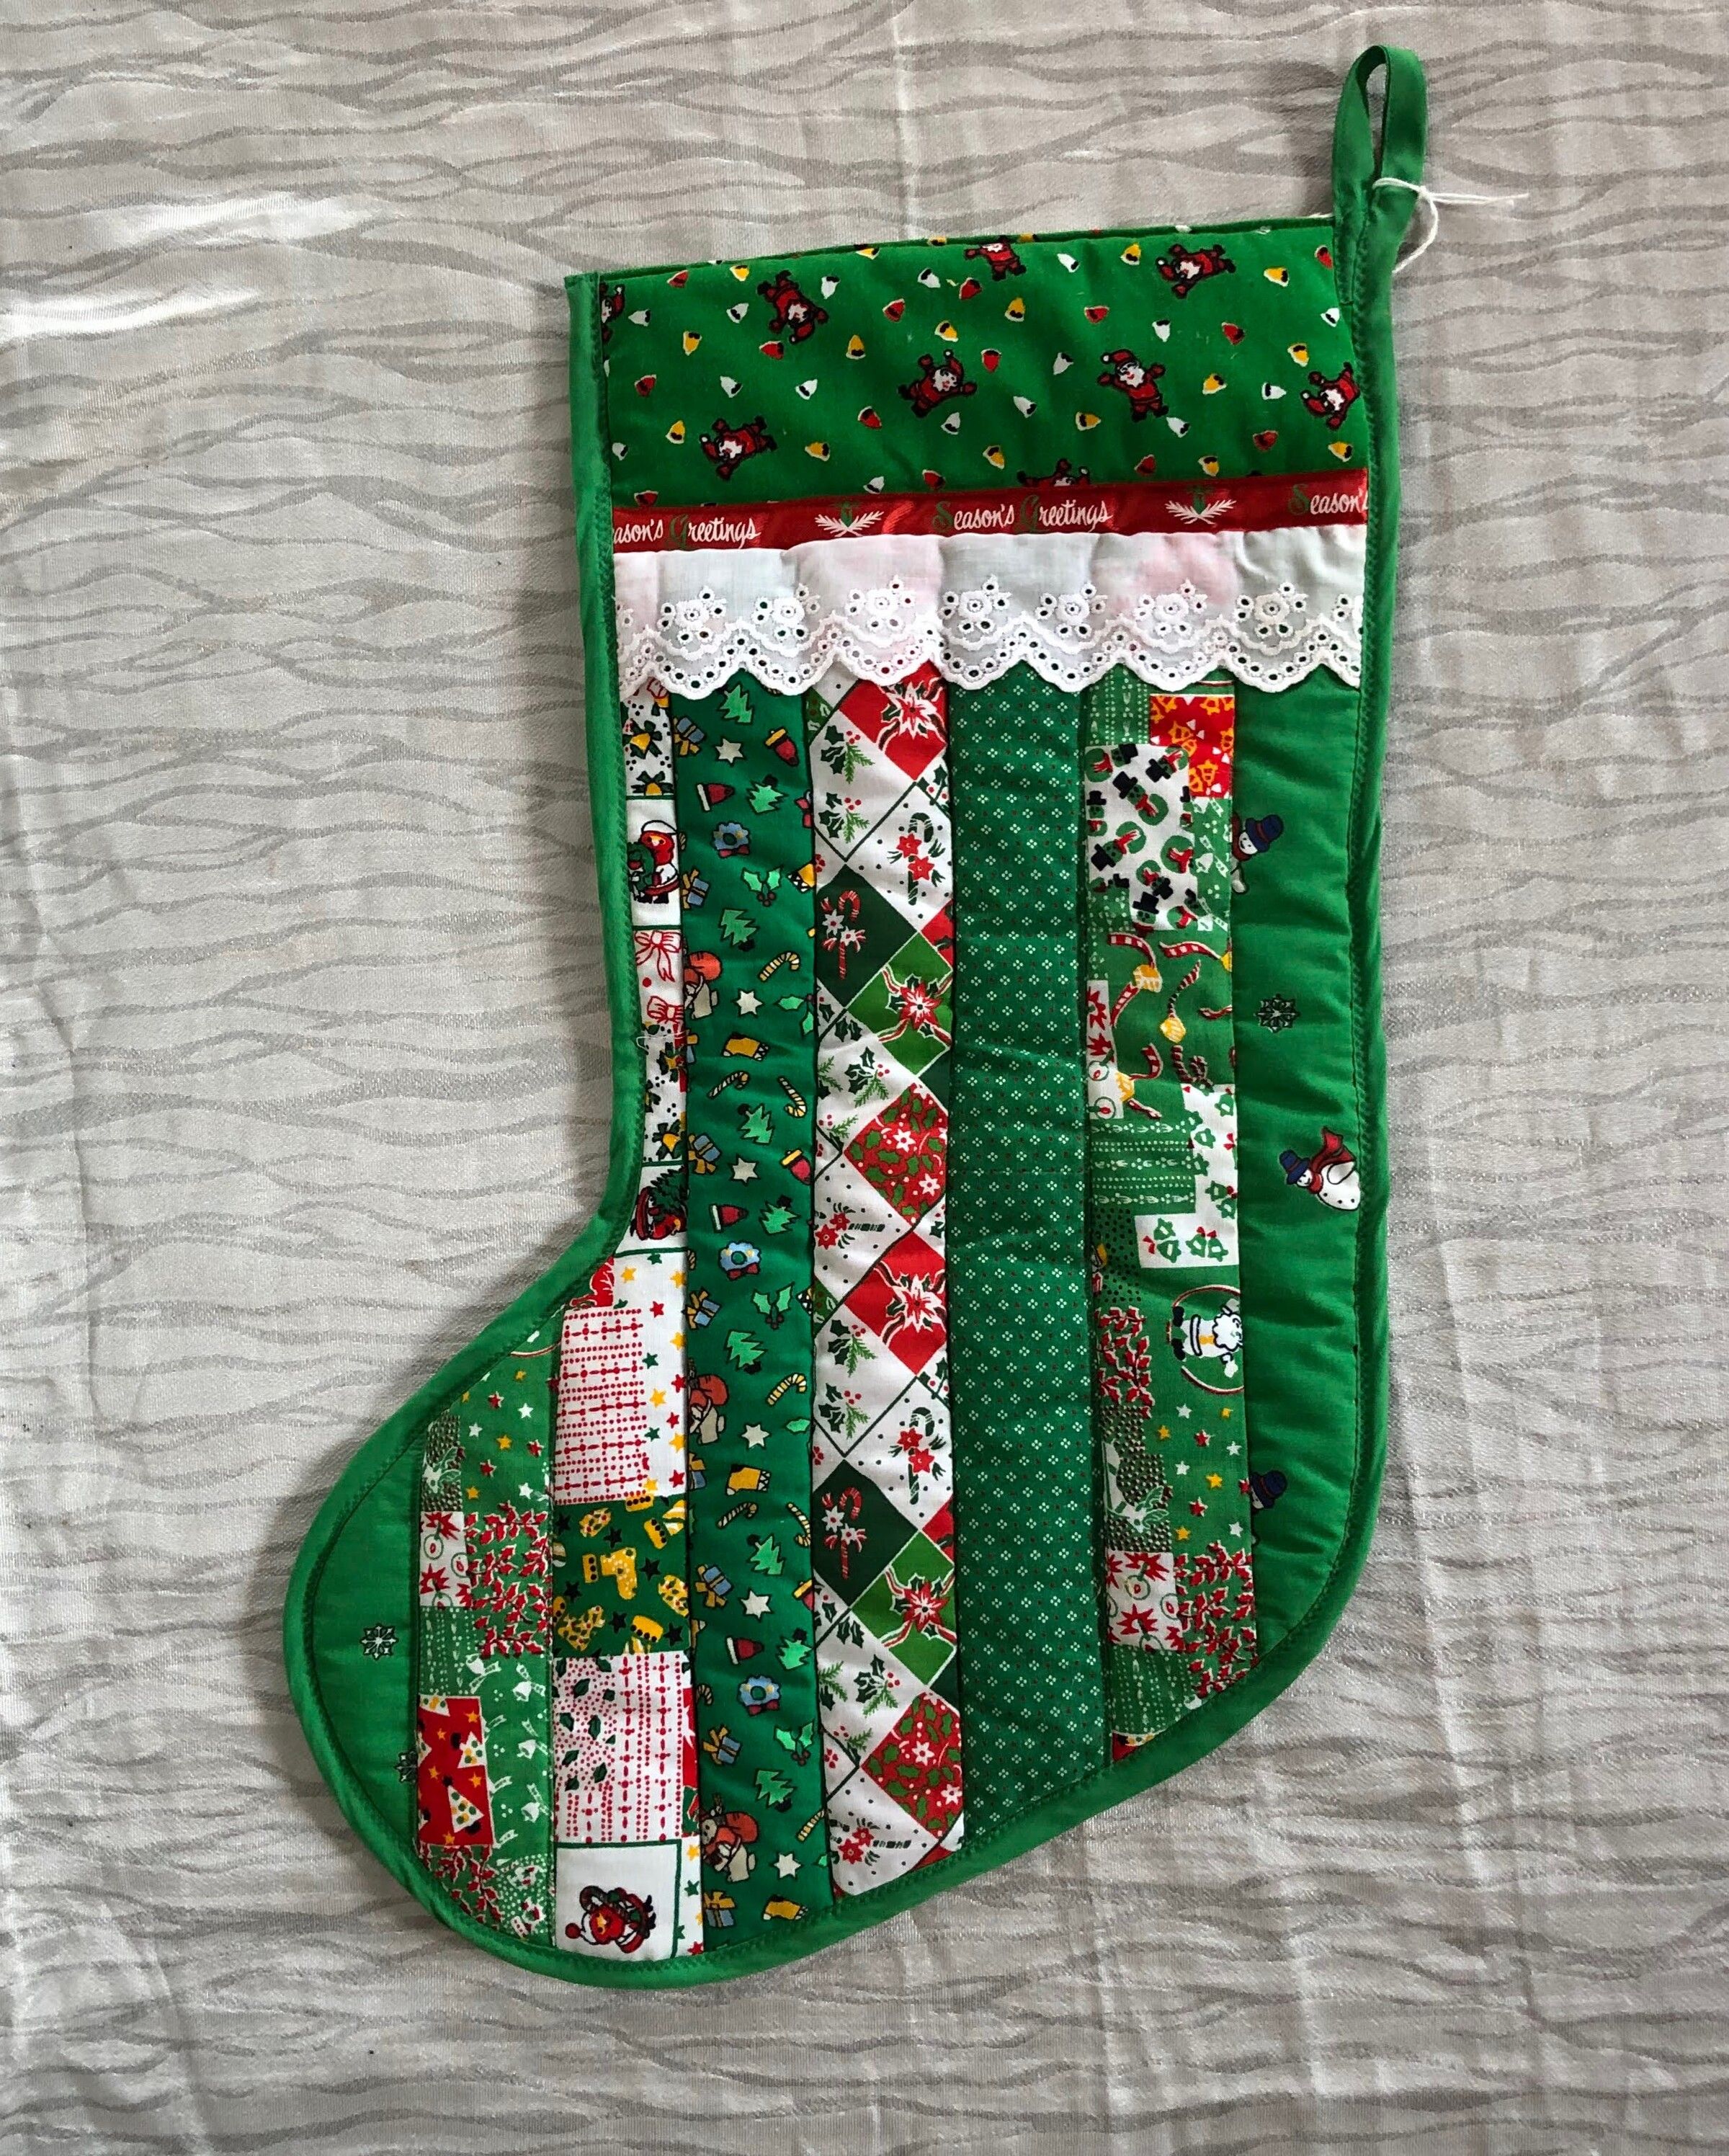 Green Patchwork Christmas Stocking - Code 37 SOLD